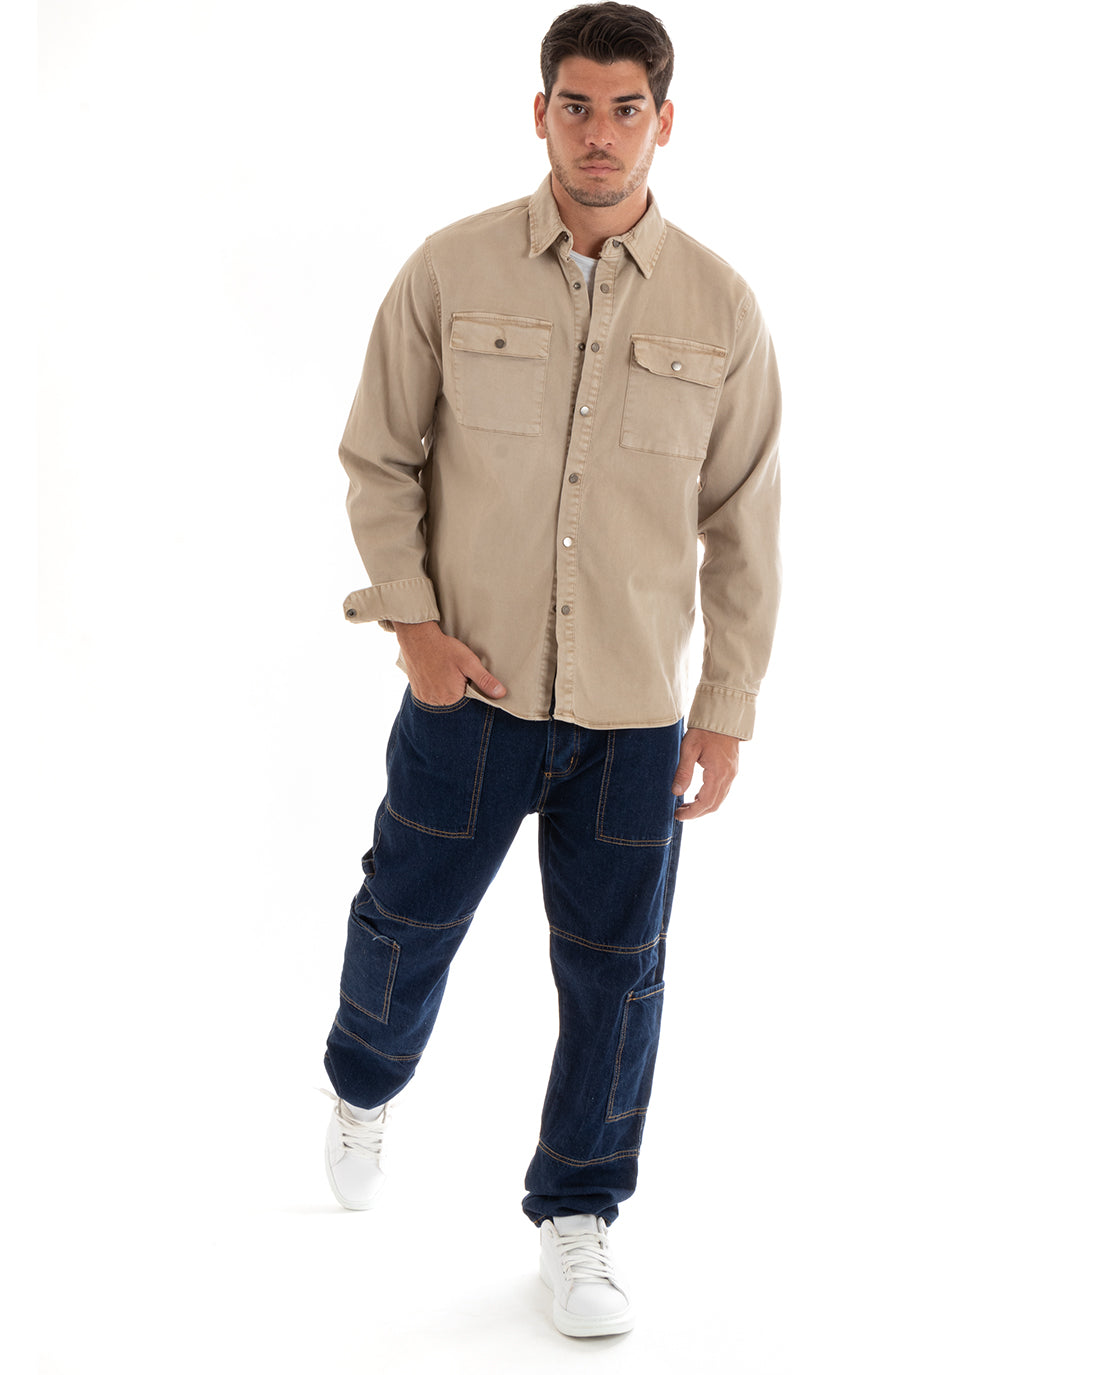 Men's Jacket Jeans Jacket Collar Long Sleeves Front Pockets Beige GIOSAL-G3079A